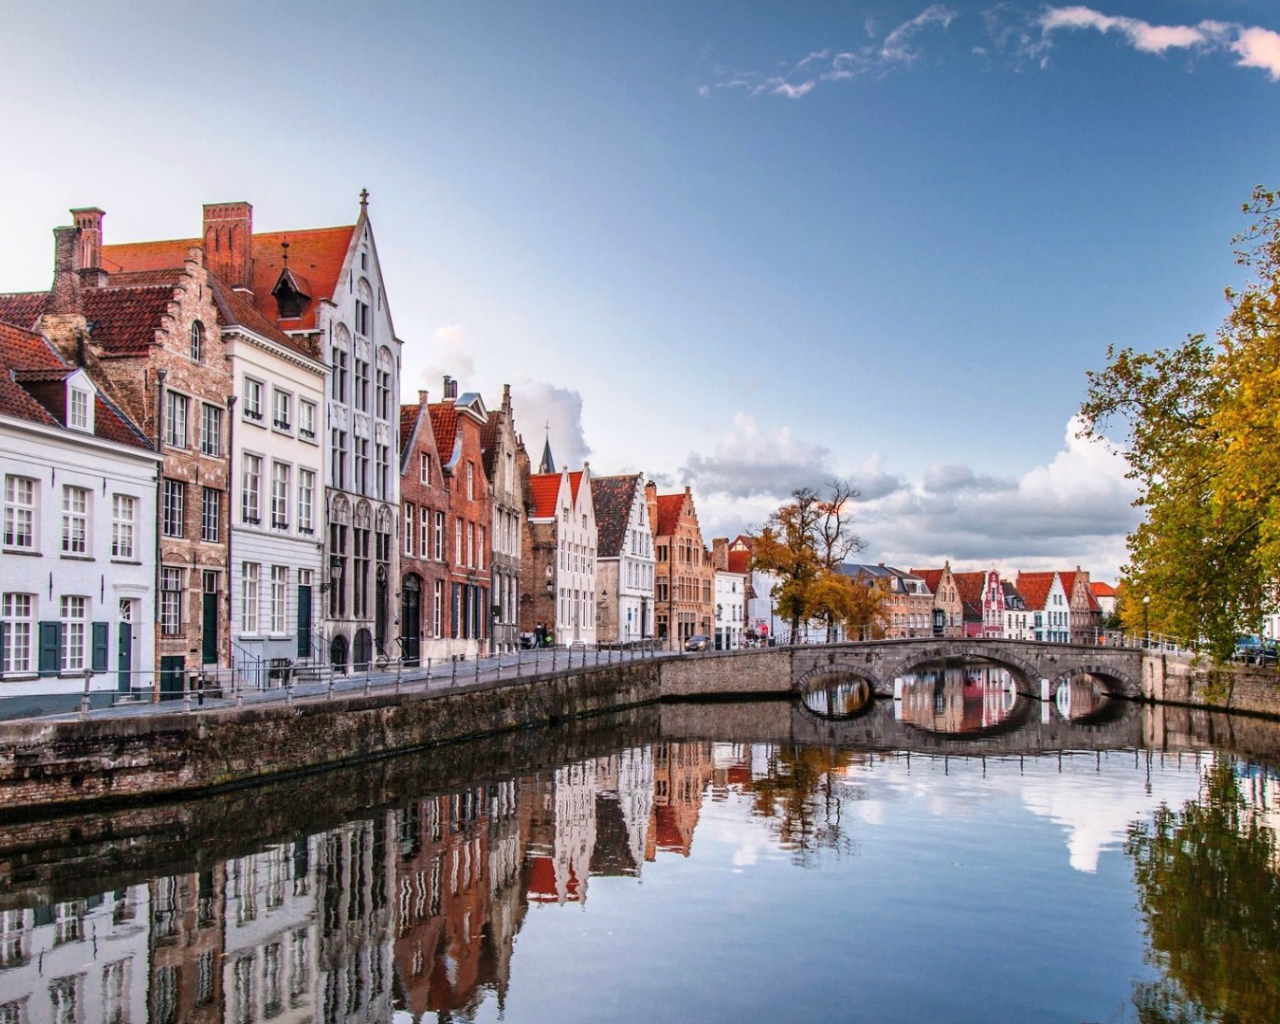 River in the city of Bruges, Belgium